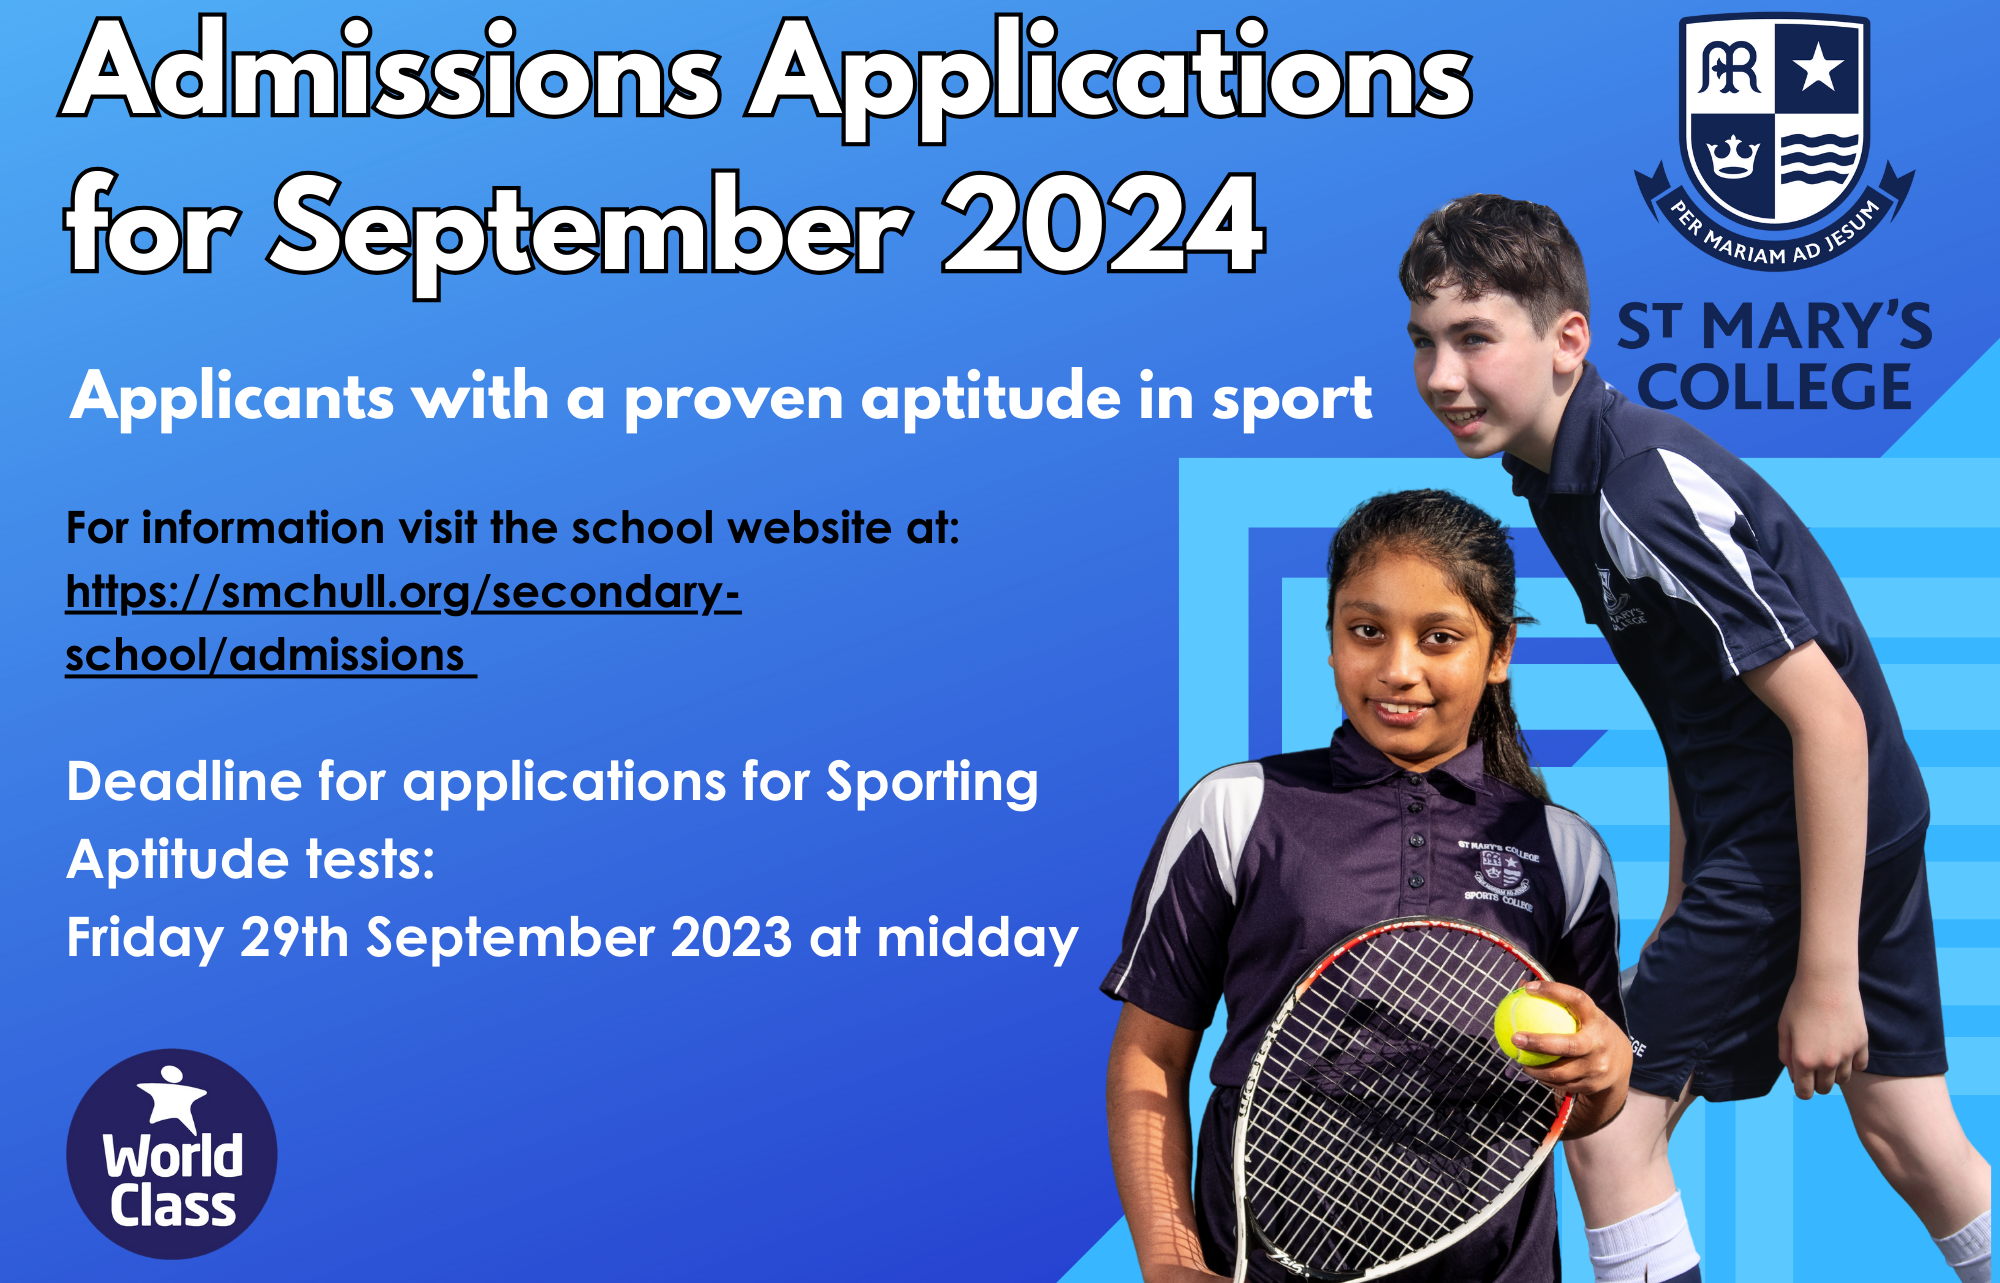 Admissions Applications for September 2024